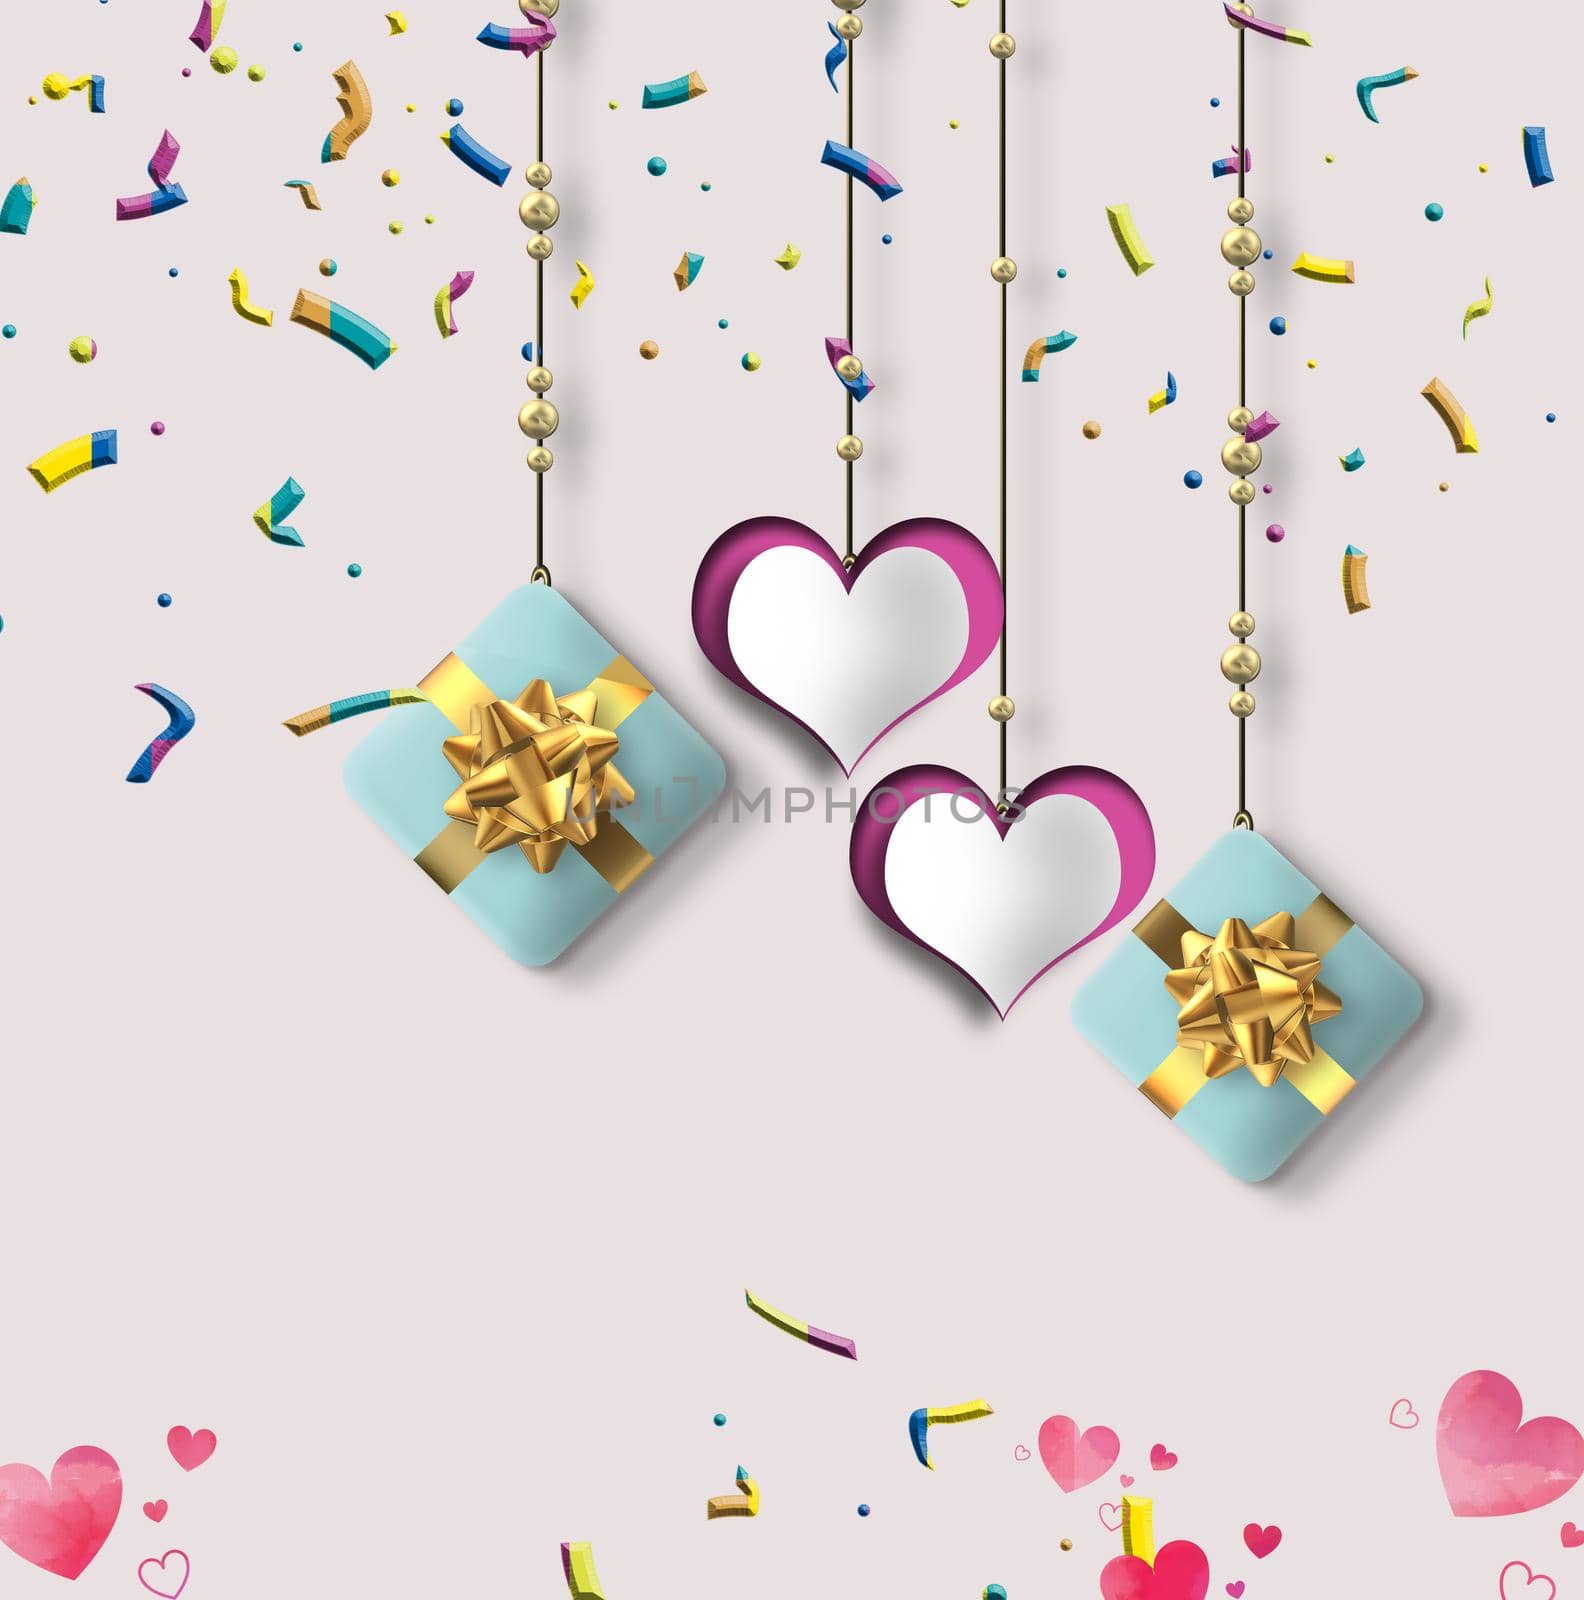 Love card with hanging hearts, gift boxes, confetti on pastel pink background. 3D illustration